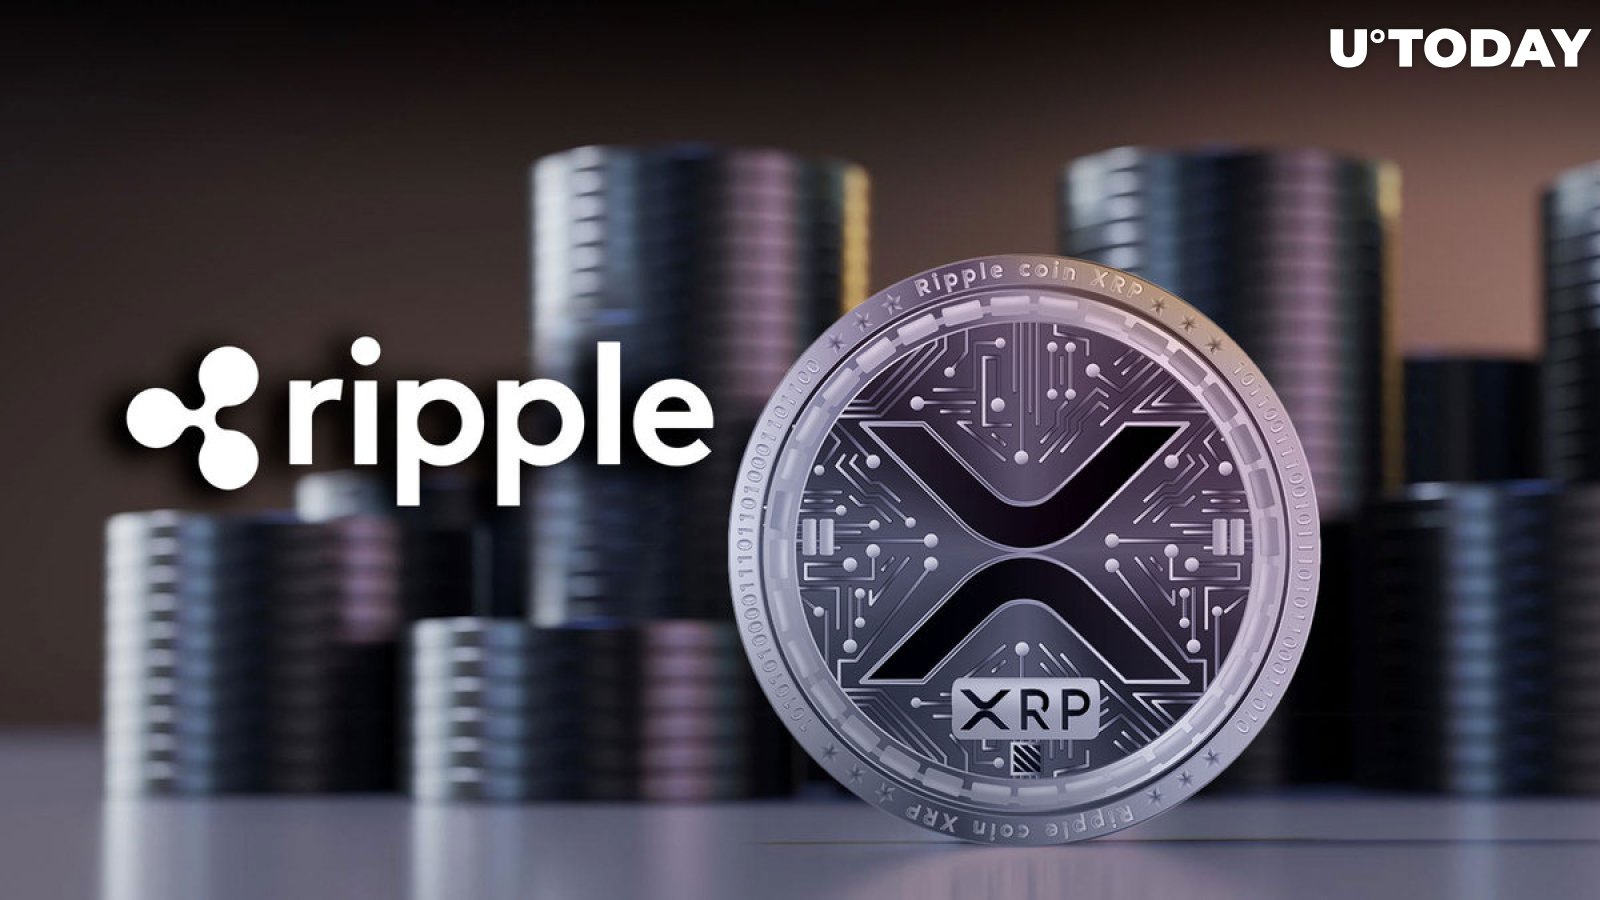 800 Million XRP Moved to Ripple Escrow Amid Stunning Price Surge